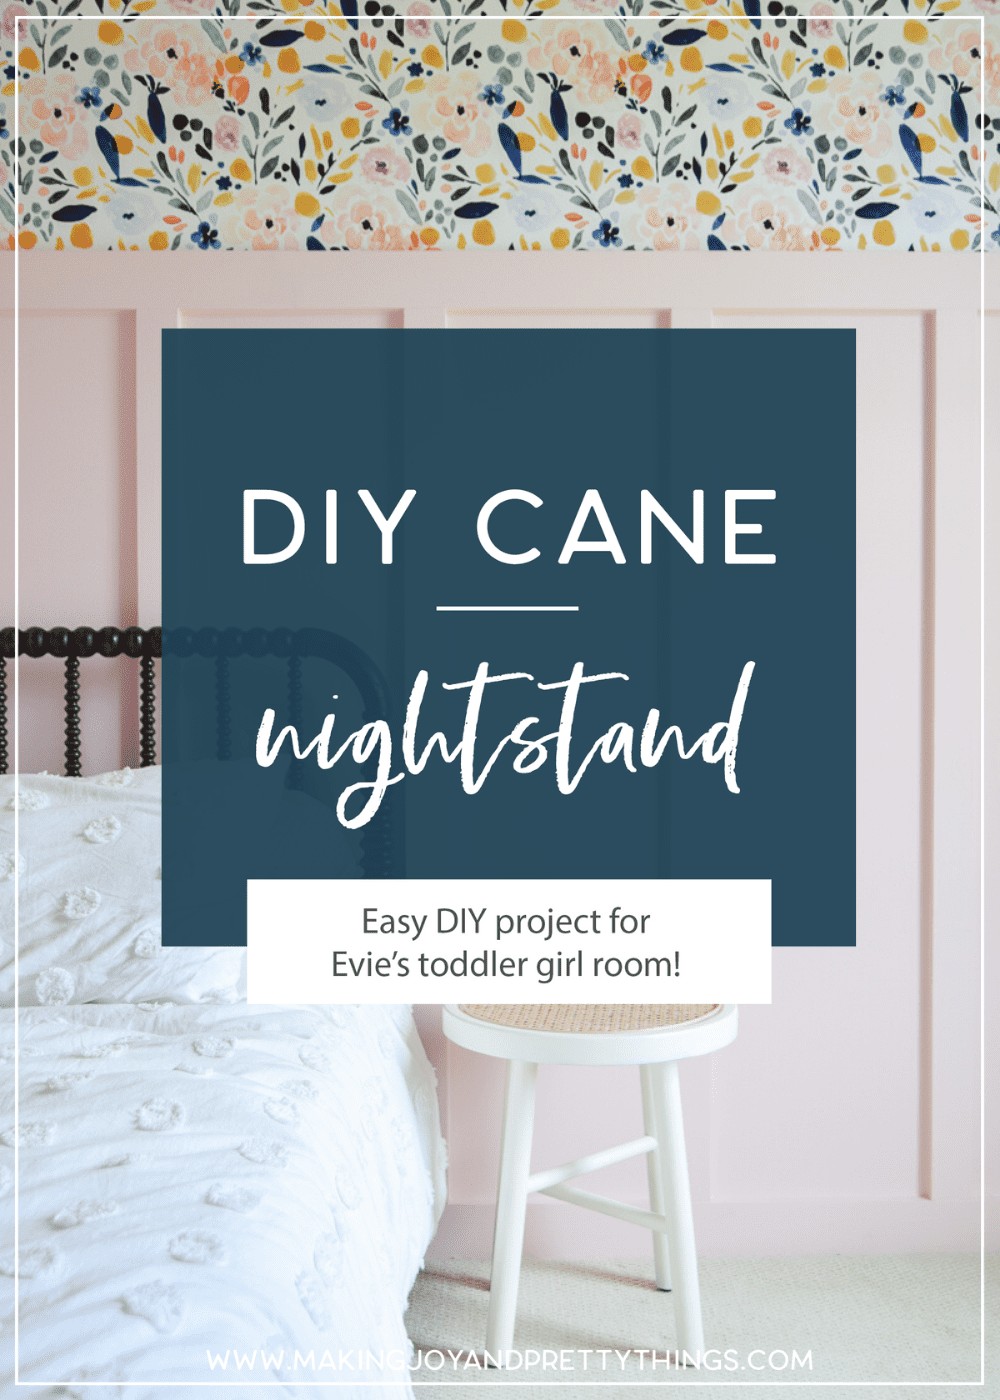 Easy DIY for toddlers room creating a unique nightstand idea from a stool using cane webbing